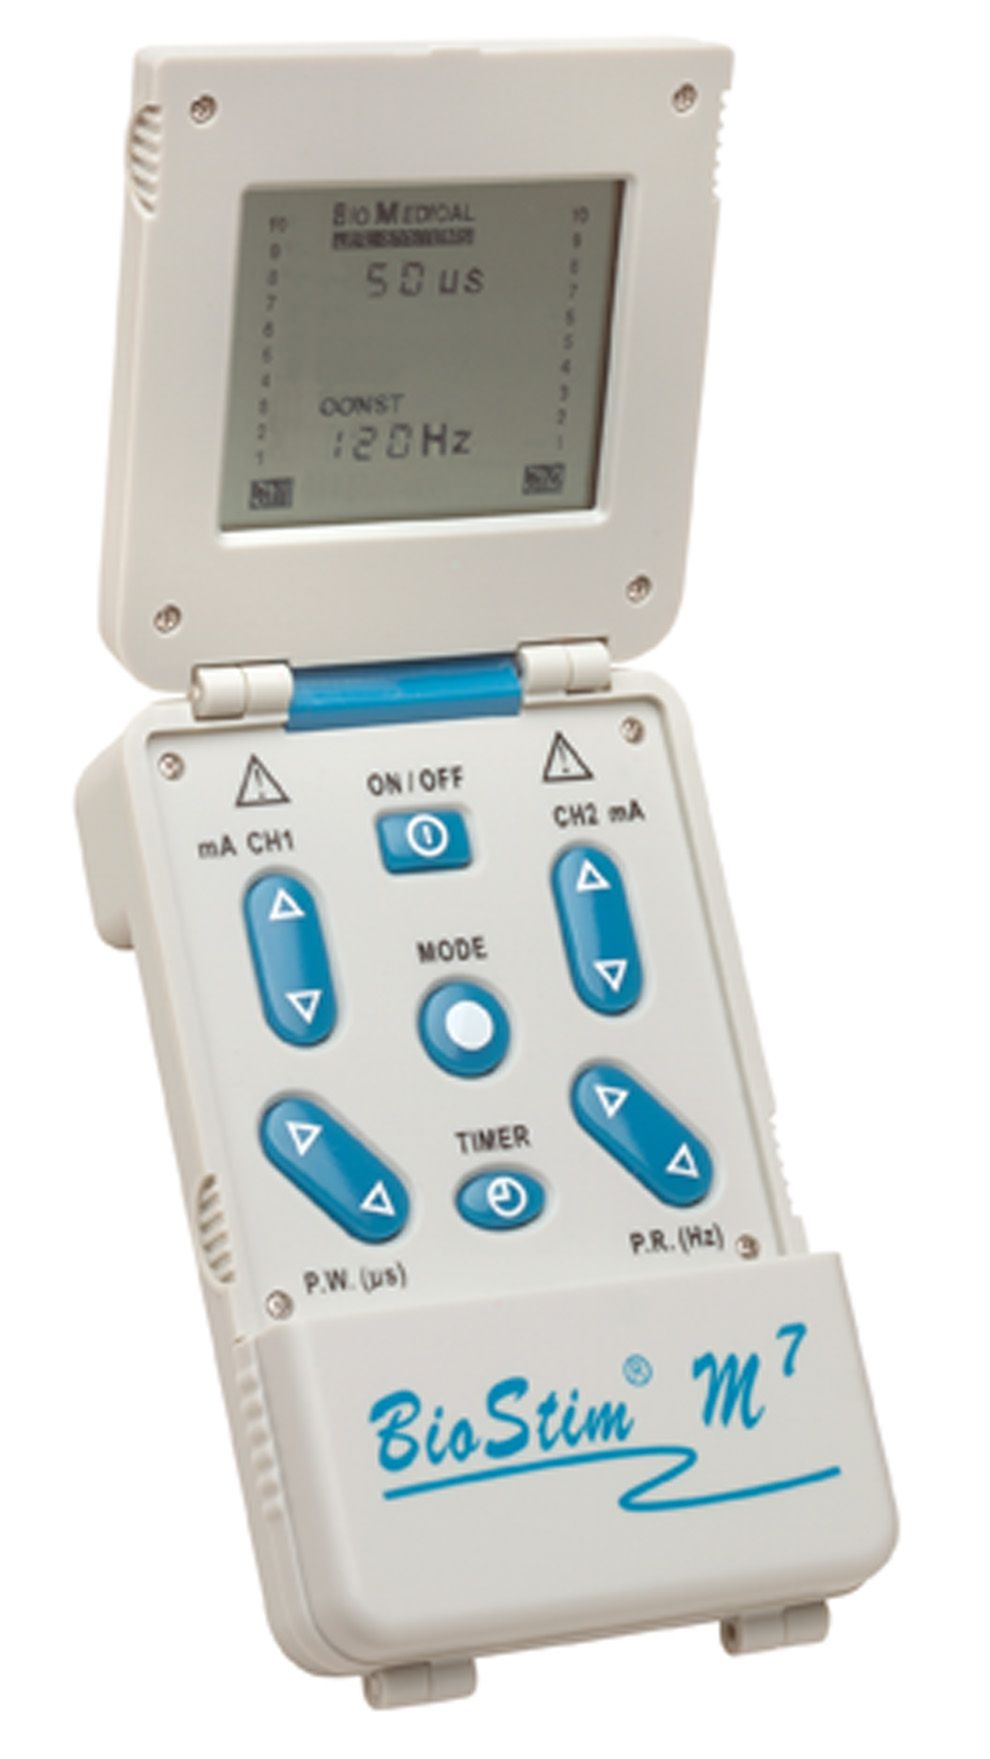 Where to buy portable tens unit